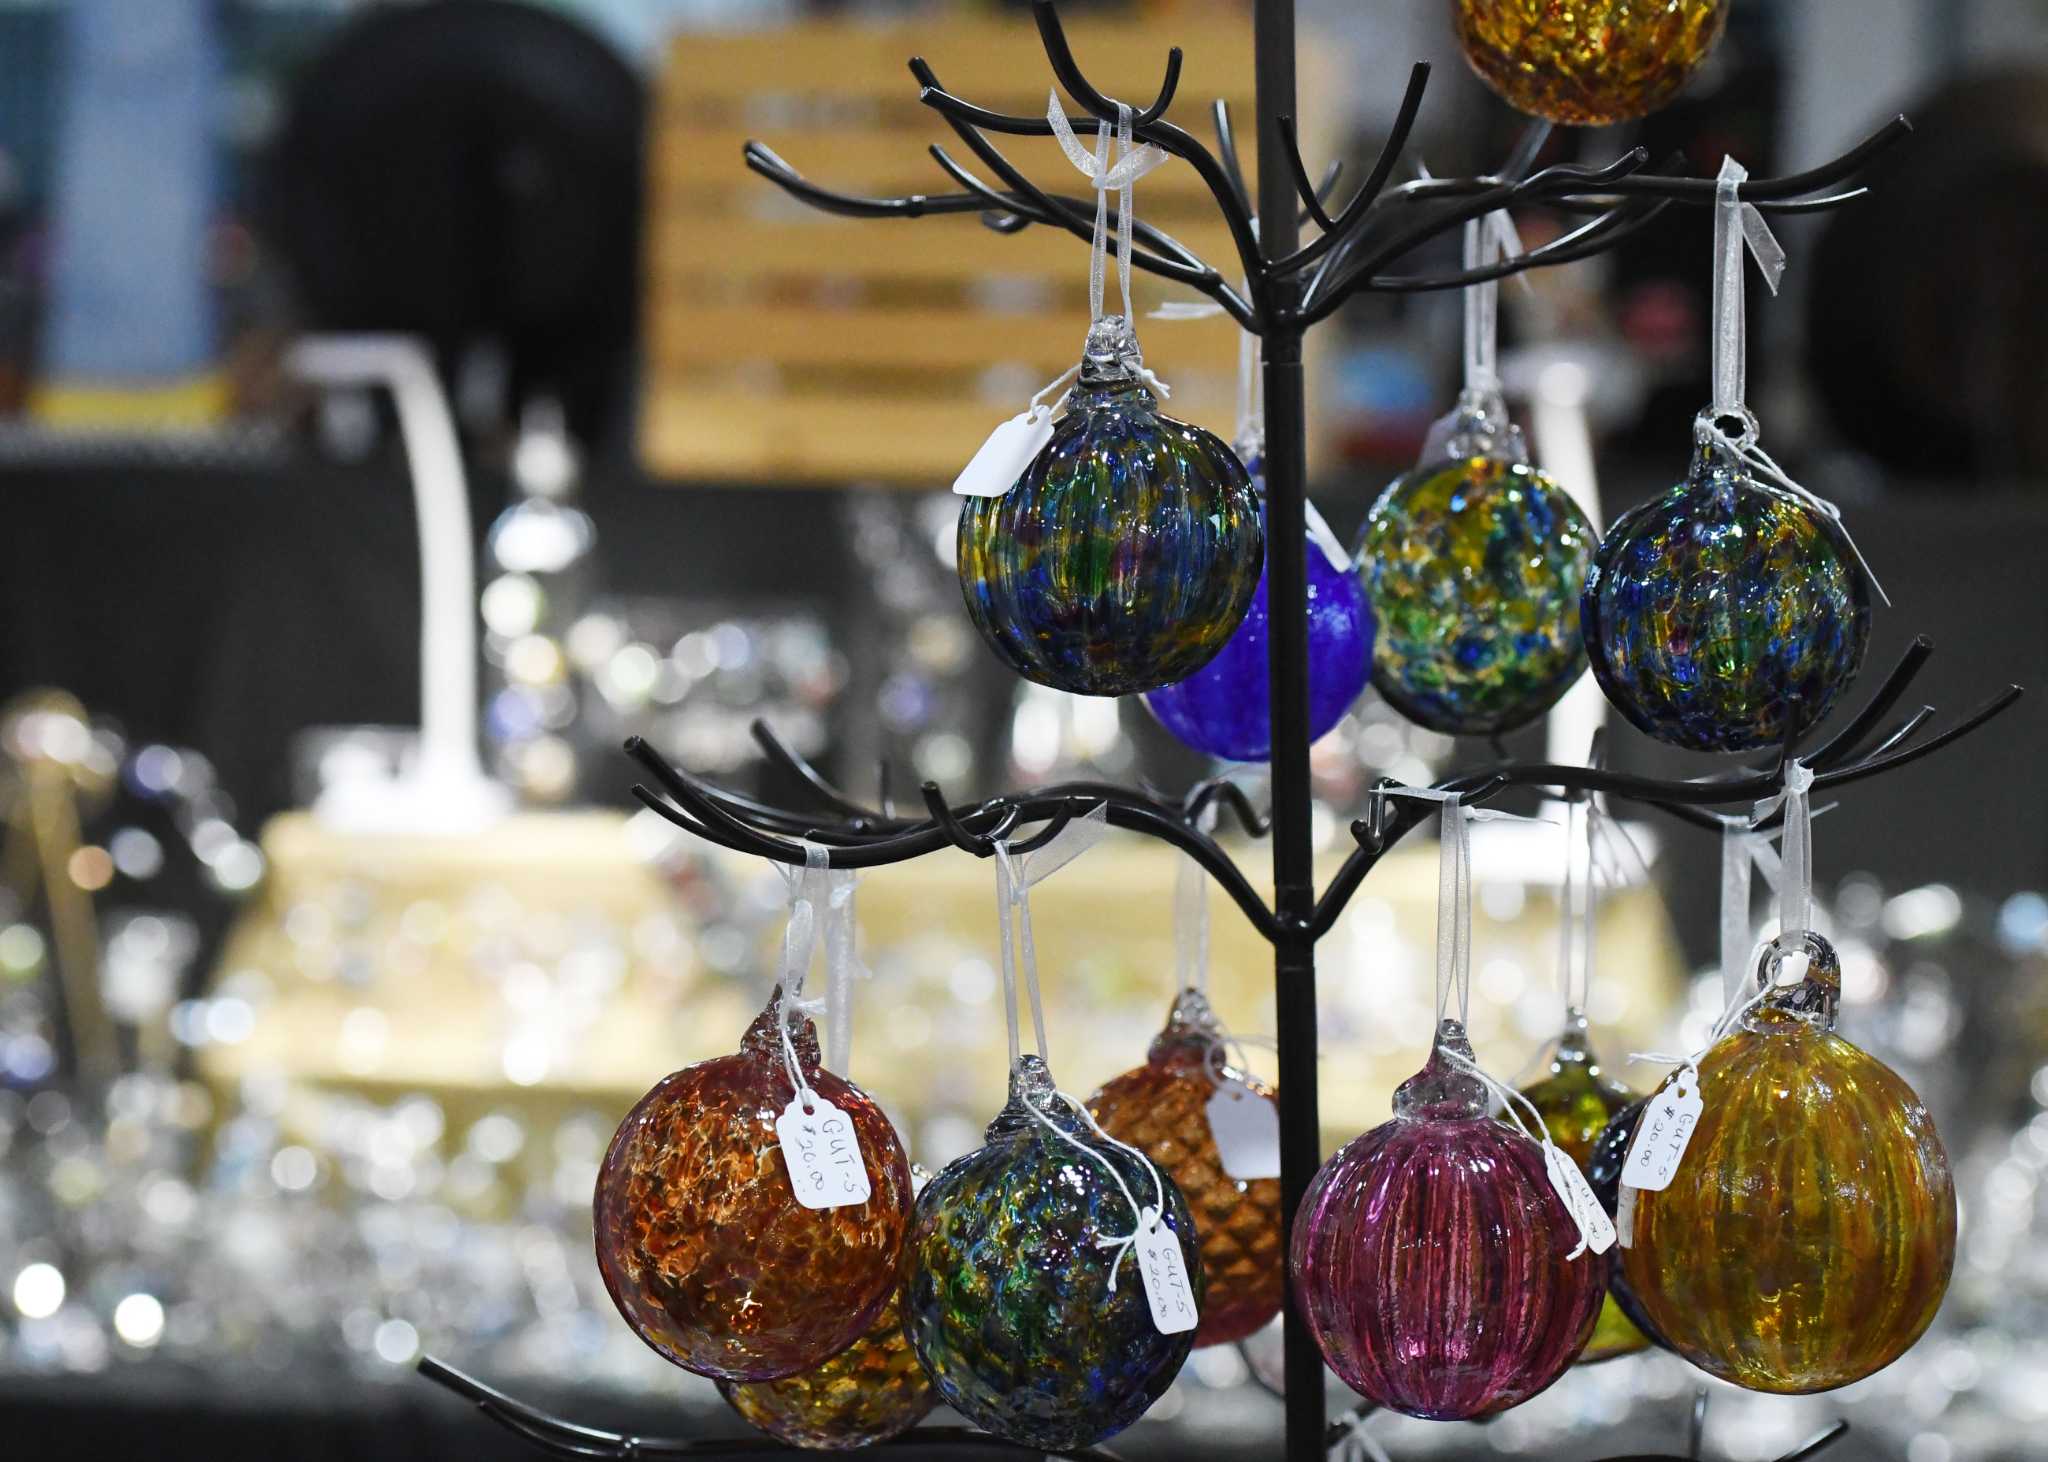 Shake Heritage holiday market on track for another recordsetting year